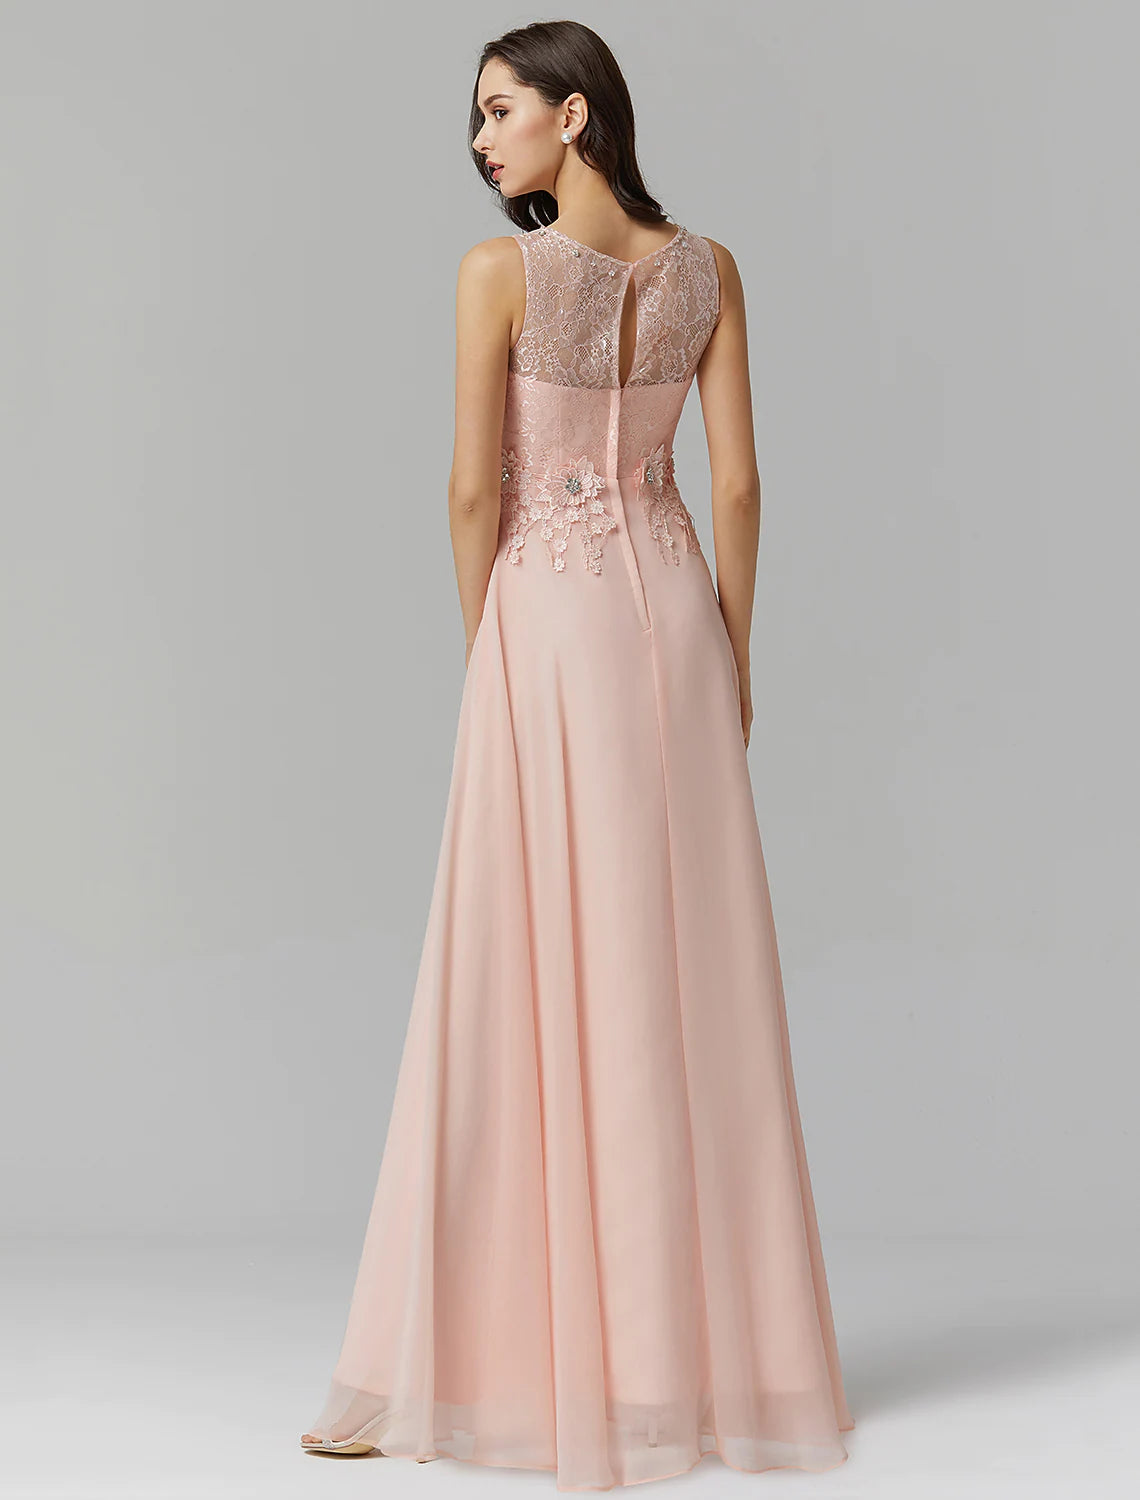 A-Line Empire Dress Wedding Guest Floor Length Sleeveless Illusion Neck Chiffon with Beading Appliques